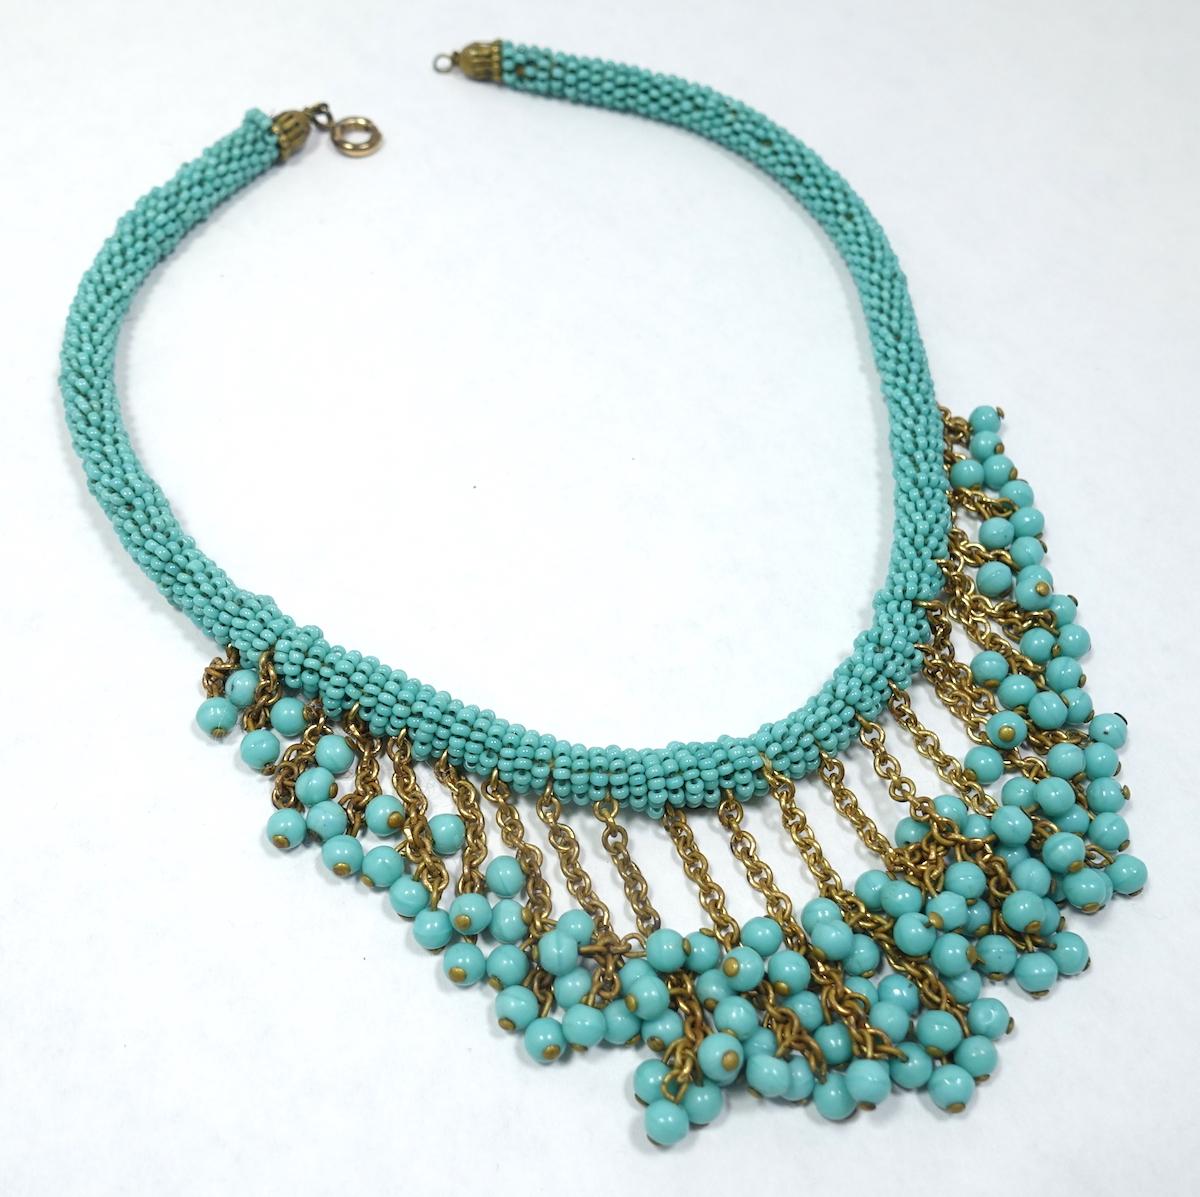 This early vintage 1930s Miriam Haskell necklace features turquoise glass beads going around the neck. Hanging downward are gold tone chains with clusters of glass turquoise beads forming a bib effect. This very early Haskell necklace is in mint